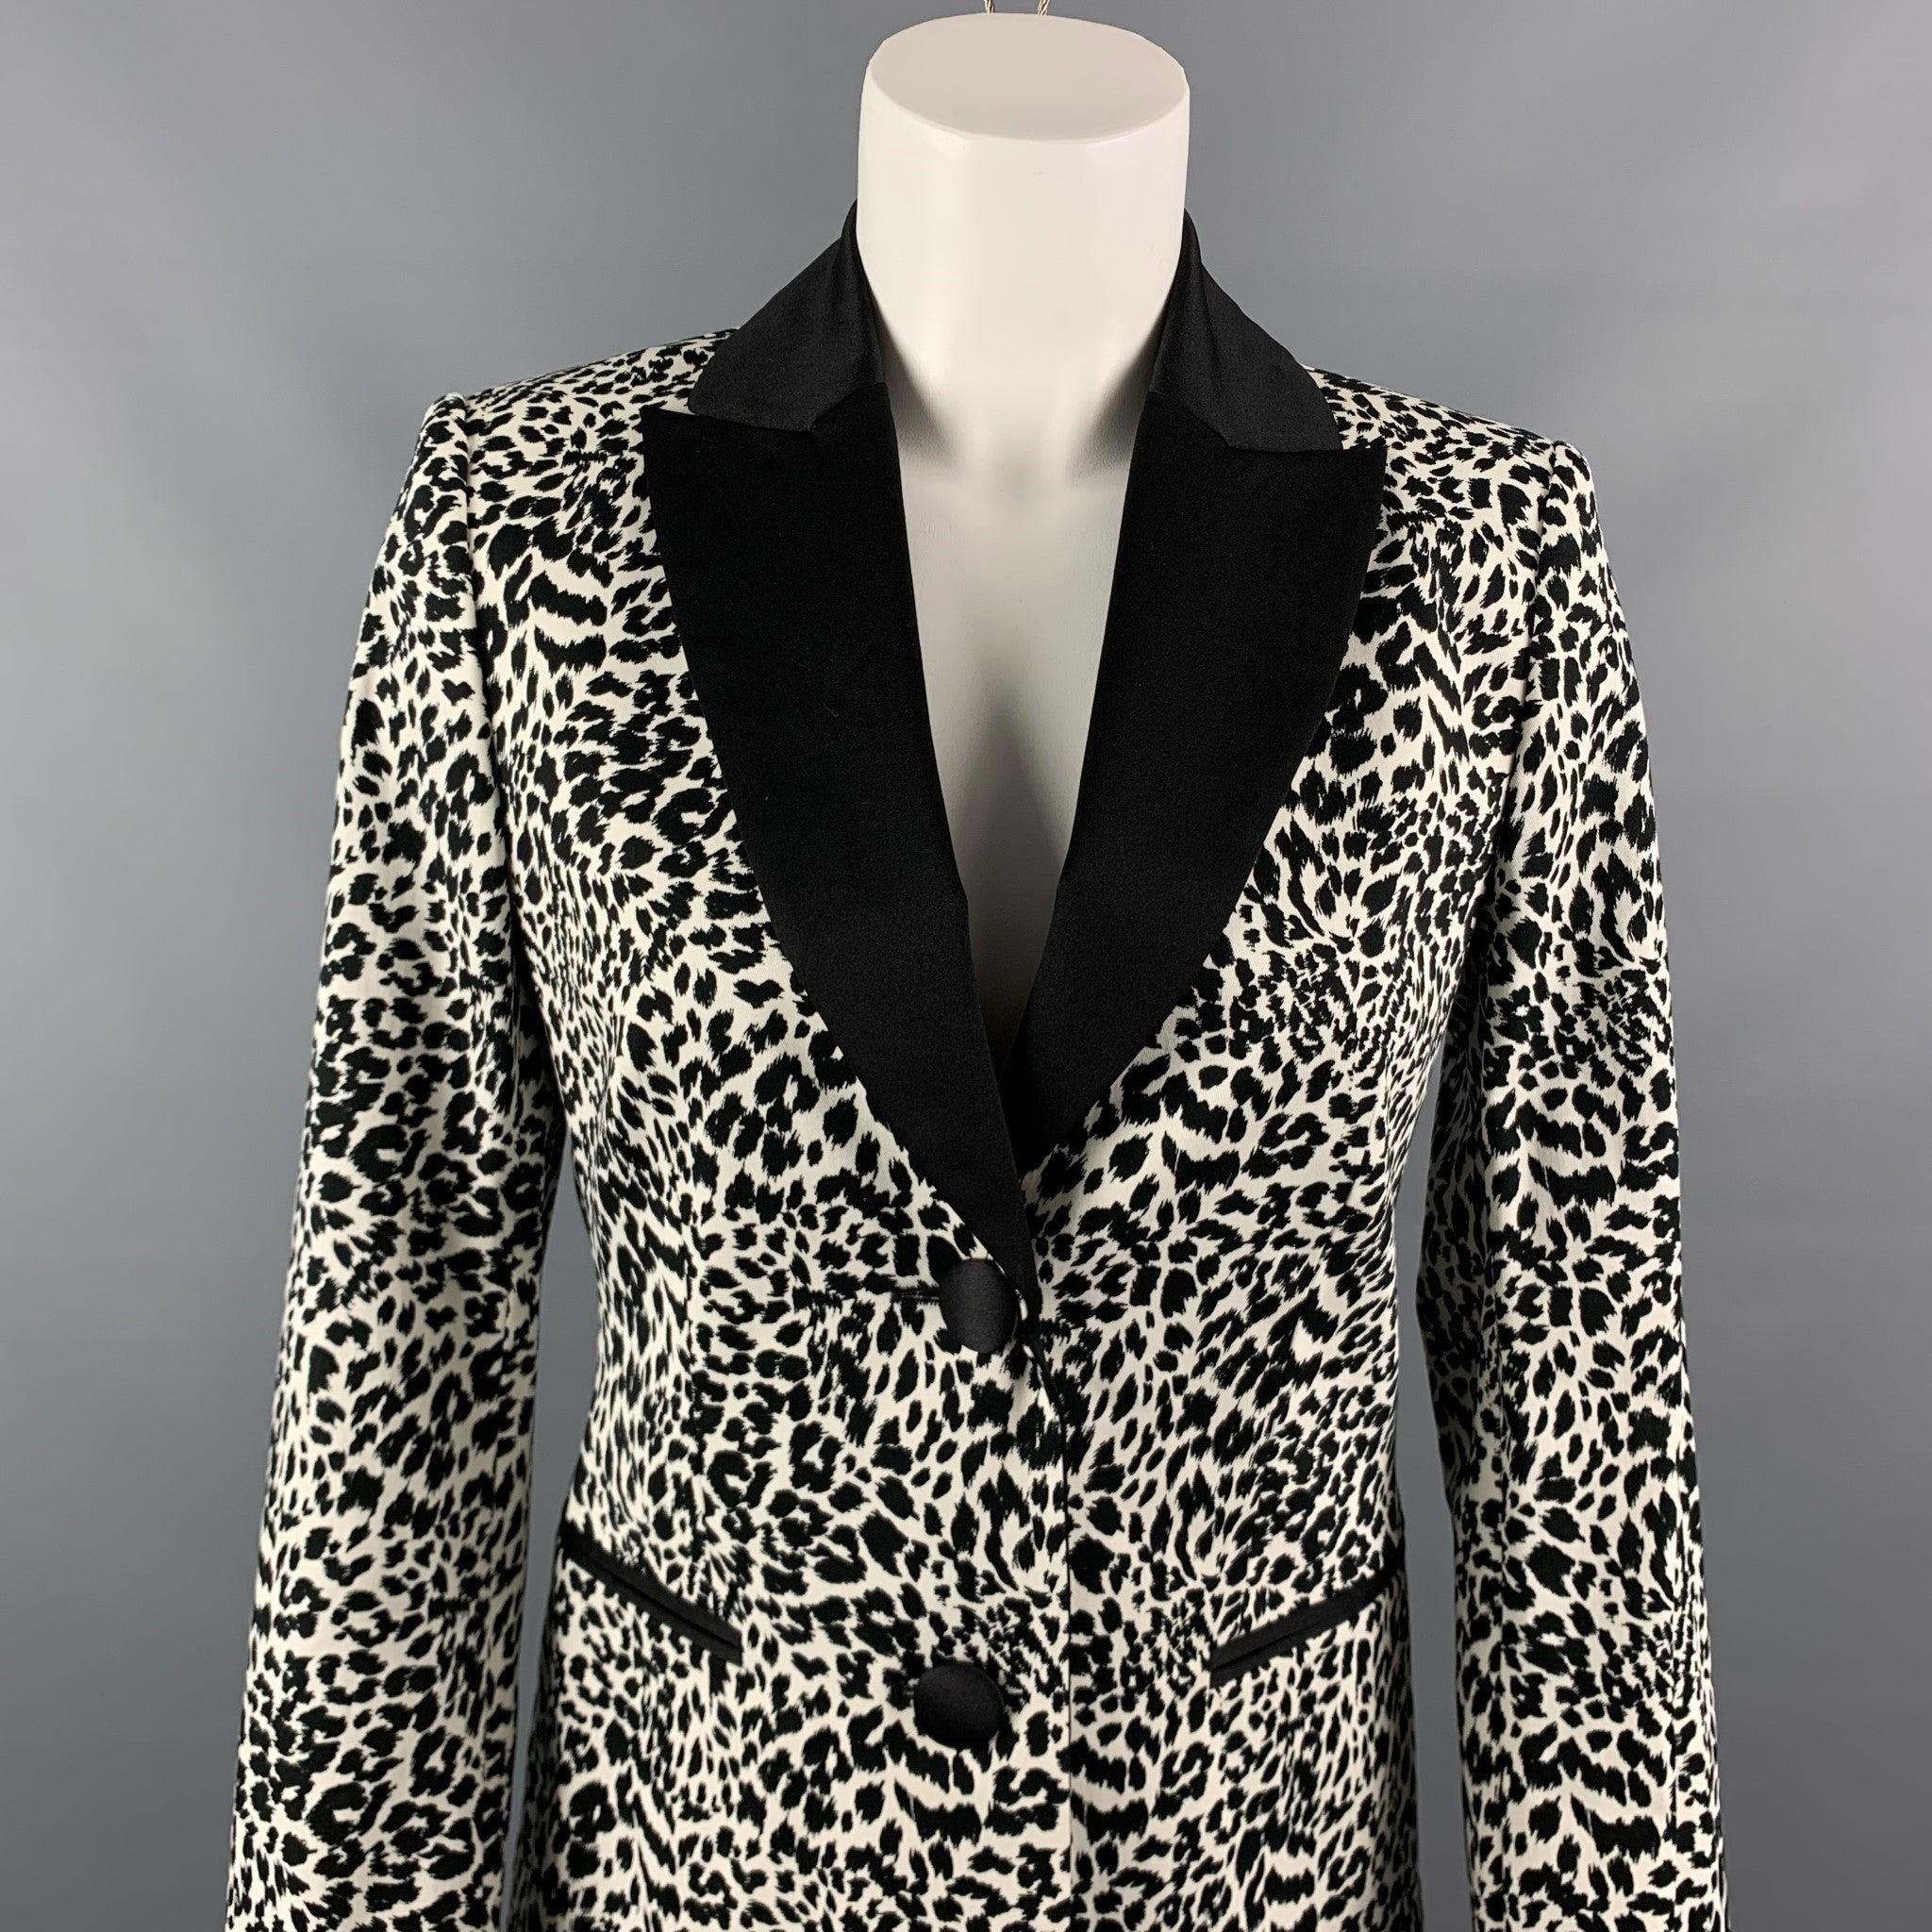 LOVE MOSCHINO jacket comes in a black & white print cotton with a full liner featuring a satin collar, slit pockets, and double button closure.
 New With Tags. 

Marked:   D 38 / GB 10 / F 38 / USA 6 / I 42
   

Measurements: 
 
Shoulder: 15 inches 